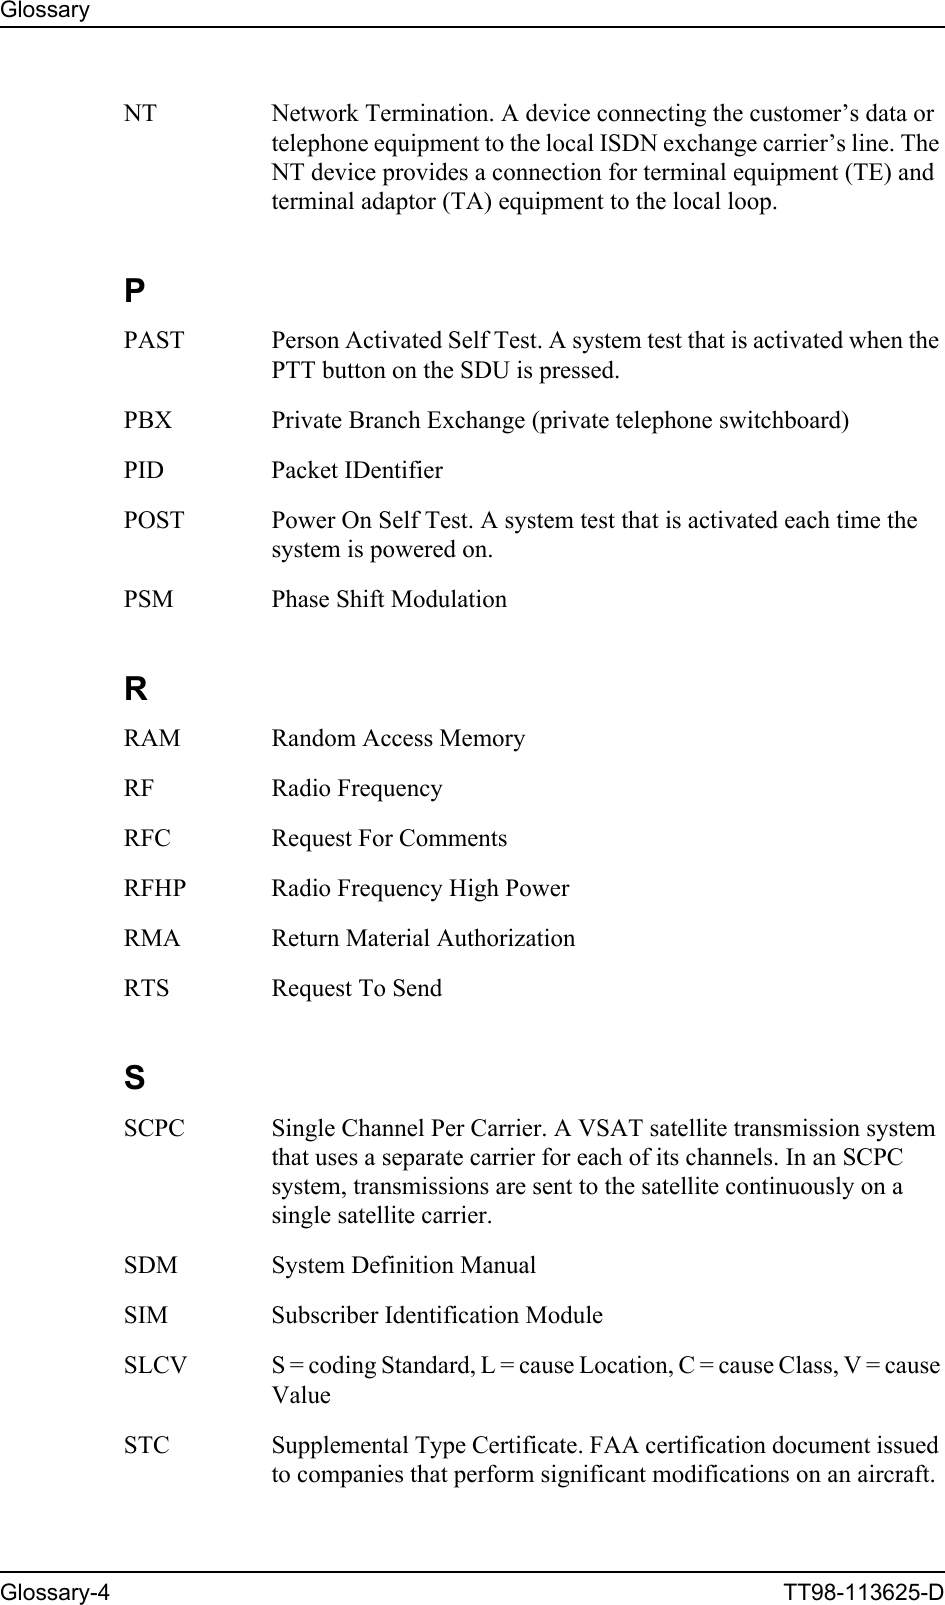 GlossaryGlossary-4 TT98-113625-DNT Network Termination. A device connecting the customer’s data or telephone equipment to the local ISDN exchange carrier’s line. The NT device provides a connection for terminal equipment (TE) and terminal adaptor (TA) equipment to the local loop. PPAST Person Activated Self Test. A system test that is activated when the PTT button on the SDU is pressed. PBX Private Branch Exchange (private telephone switchboard) PID Packet IDentifier POST Power On Self Test. A system test that is activated each time the system is powered on. PSM Phase Shift Modulation RRAM Random Access Memory RF Radio Frequency RFC Request For Comments RFHP Radio Frequency High Power RMA Return Material Authorization RTS Request To Send SSCPC Single Channel Per Carrier. A VSAT satellite transmission system that uses a separate carrier for each of its channels. In an SCPC system, transmissions are sent to the satellite continuously on a single satellite carrier. SDM System Definition Manual SIM Subscriber Identification Module SLCV S = coding Standard, L = cause Location, C = cause Class, V = cause Value STC Supplemental Type Certificate. FAA certification document issued to companies that perform significant modifications on an aircraft. 